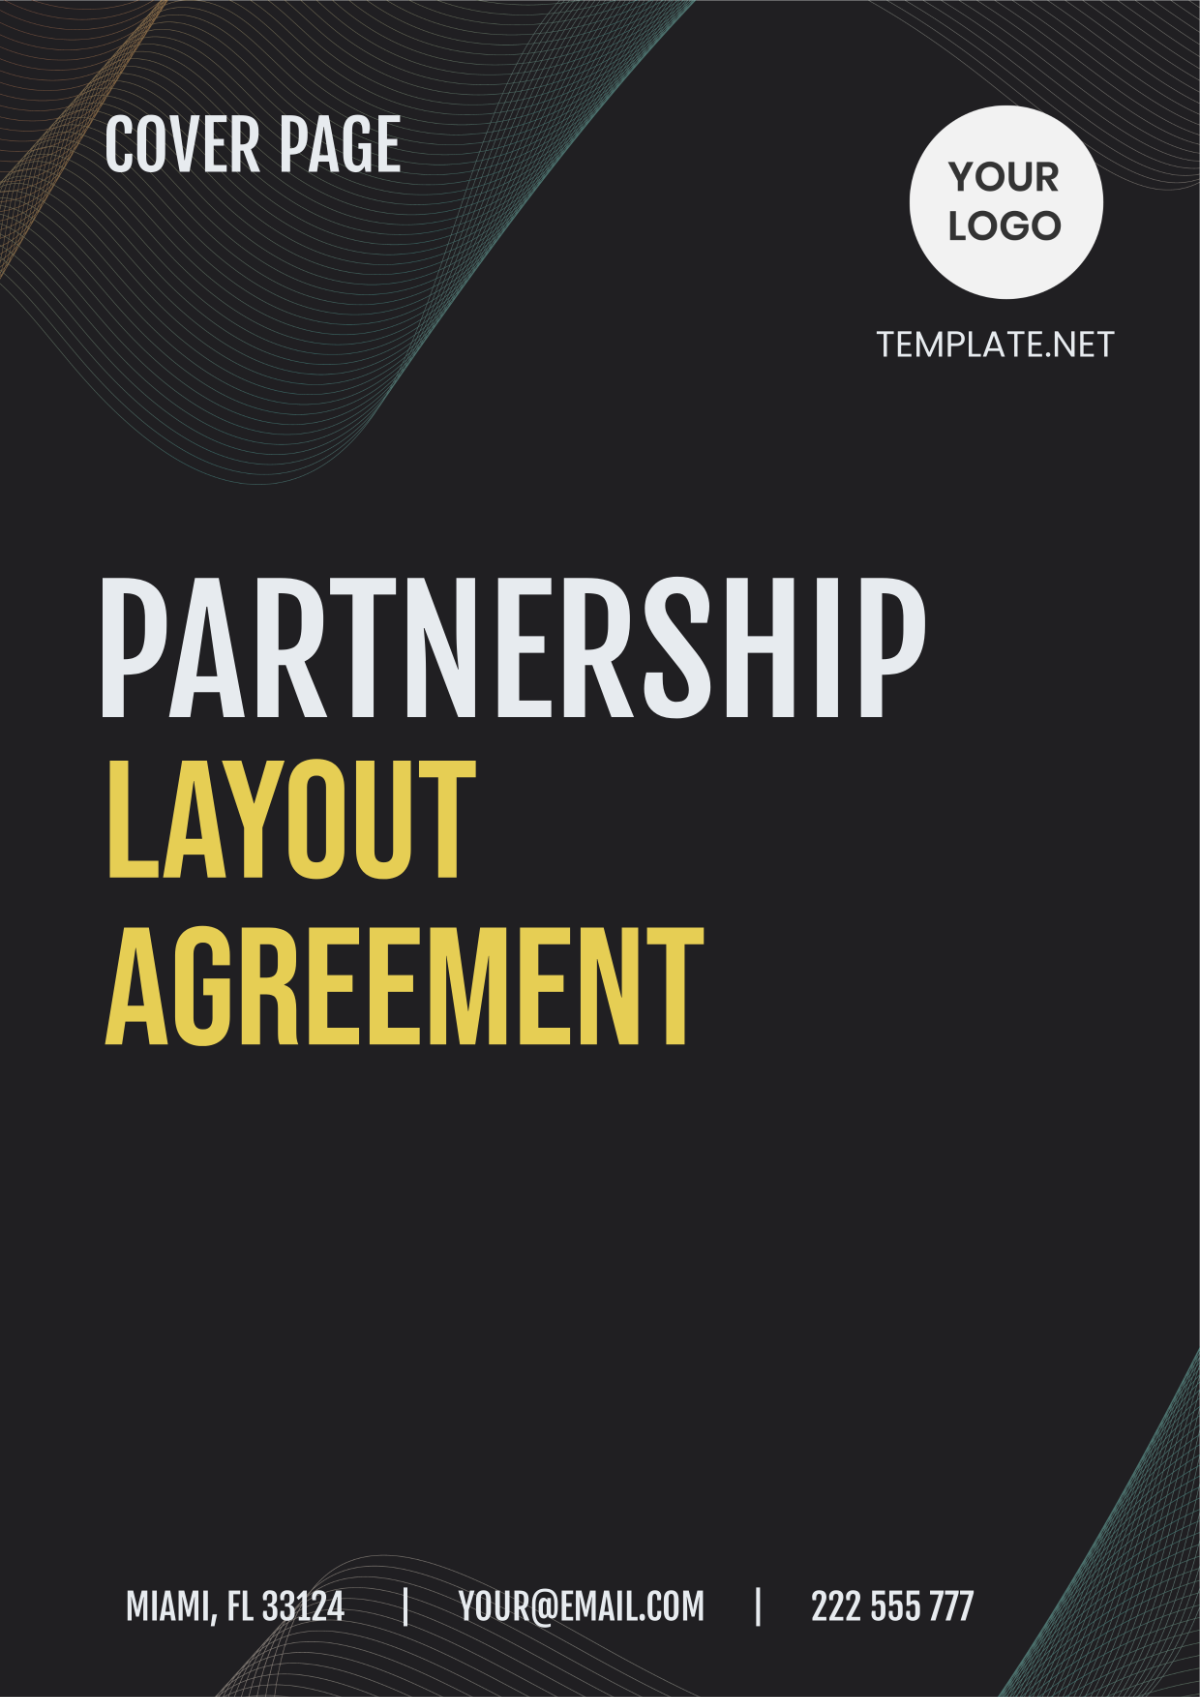 Partnership Layout Agreement Template